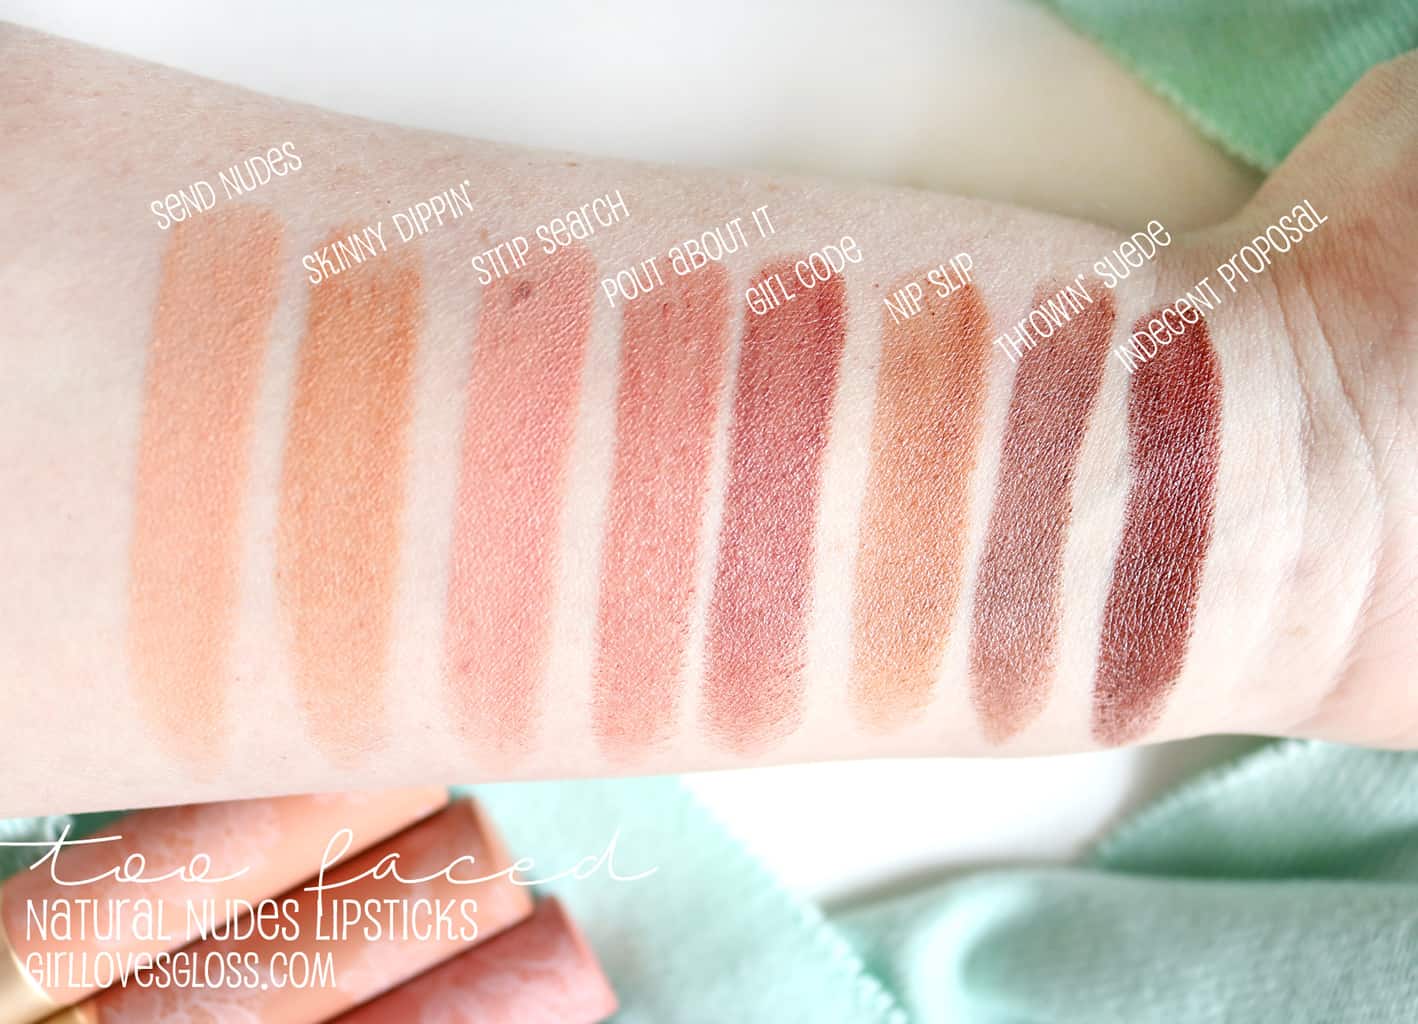 Too Faced Natural Nudes Lipstick Swatches and Review